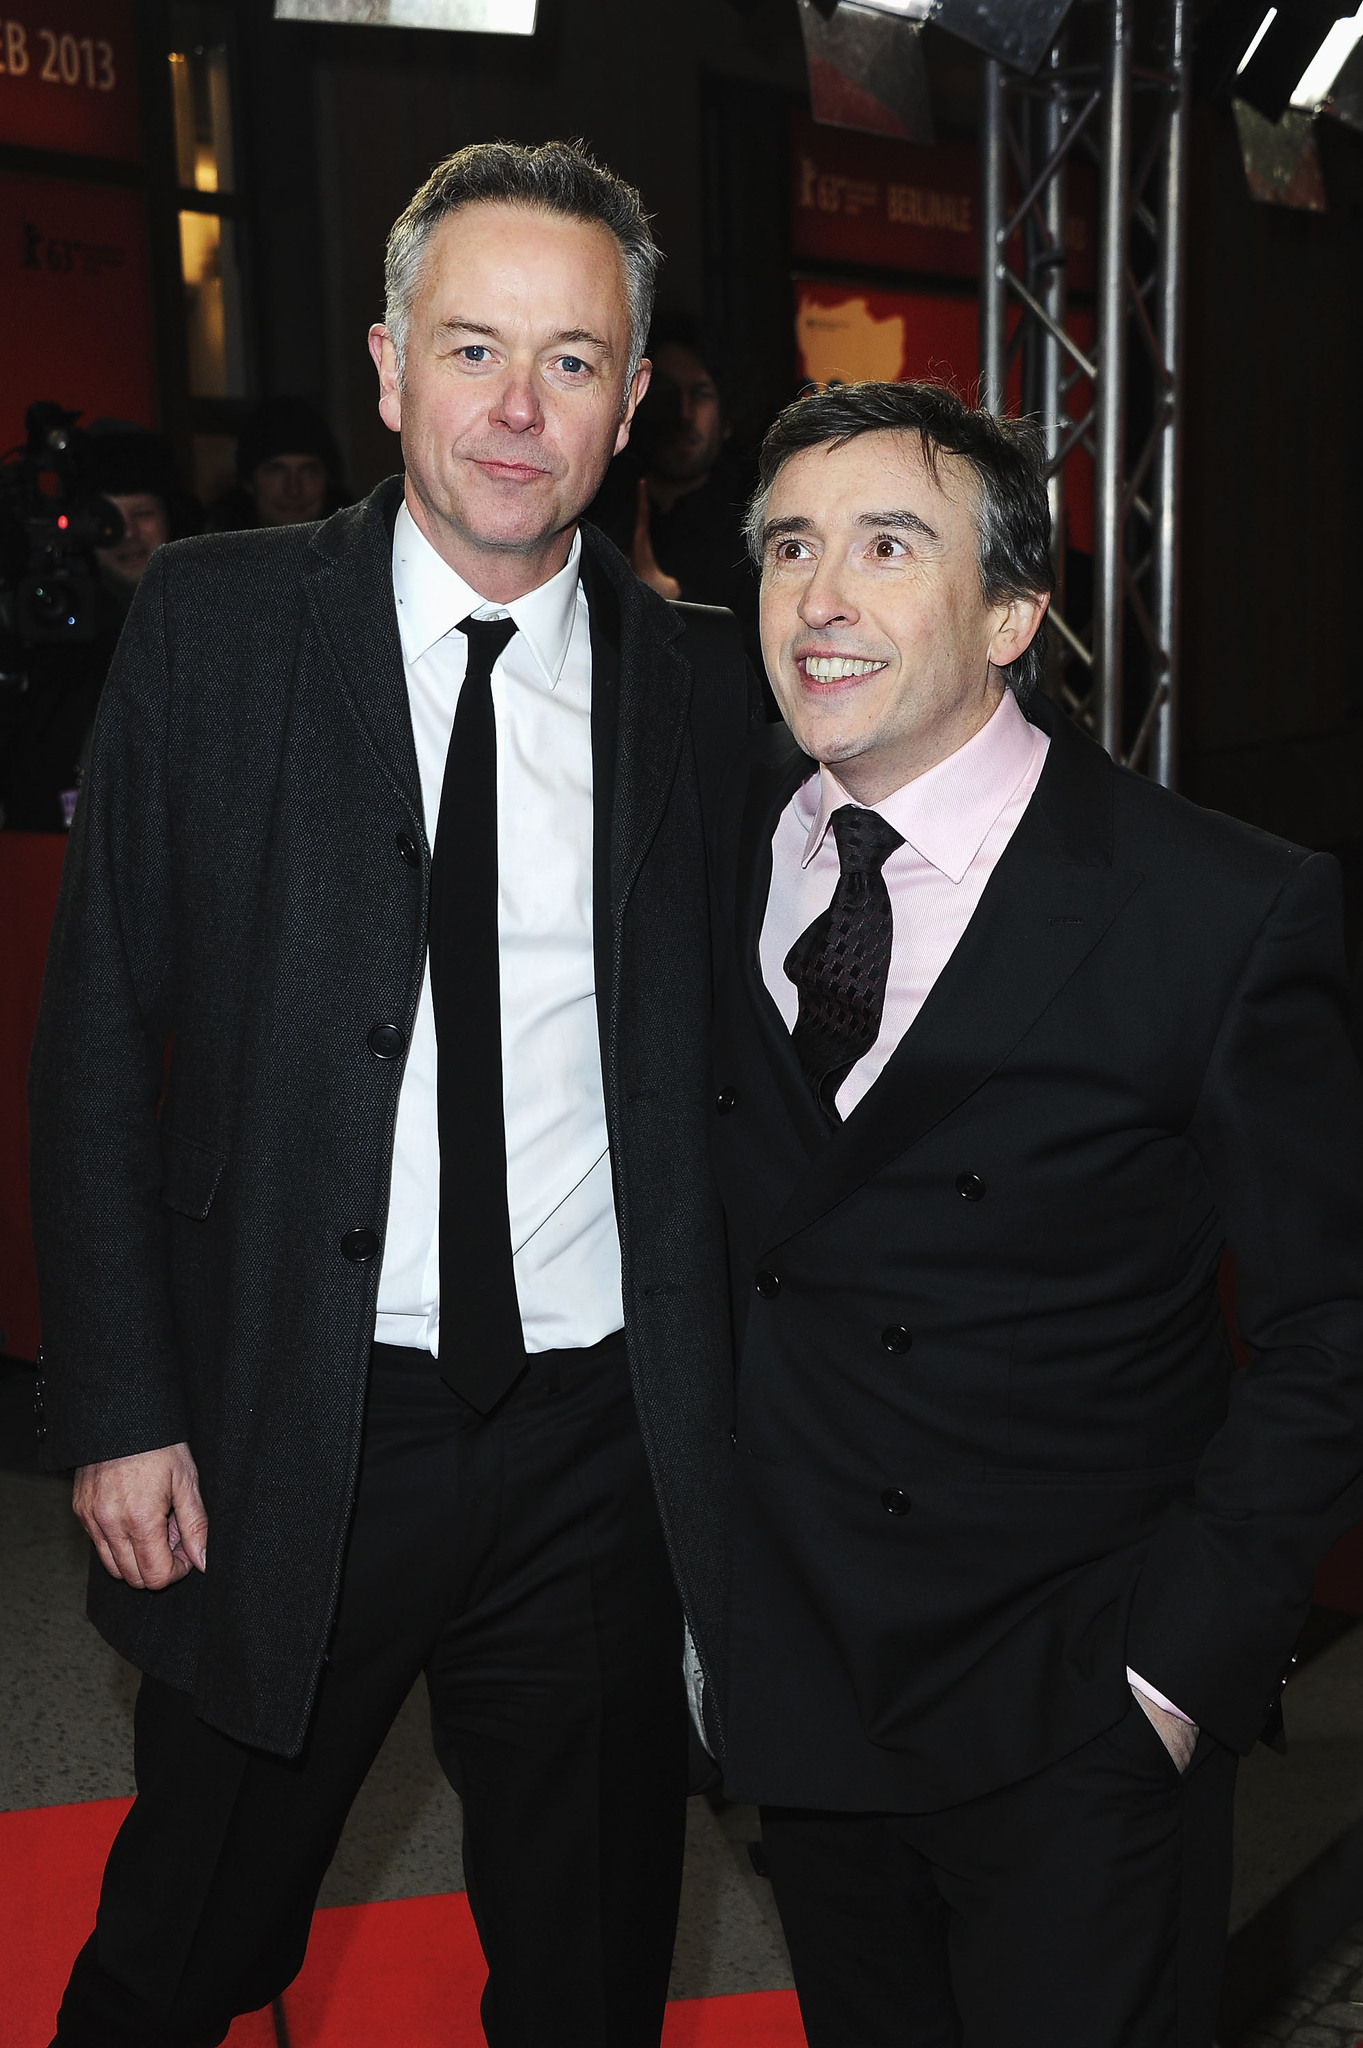 Steve Coogan and Michael Winterbottom at event of Taip atrodo meile (2013)